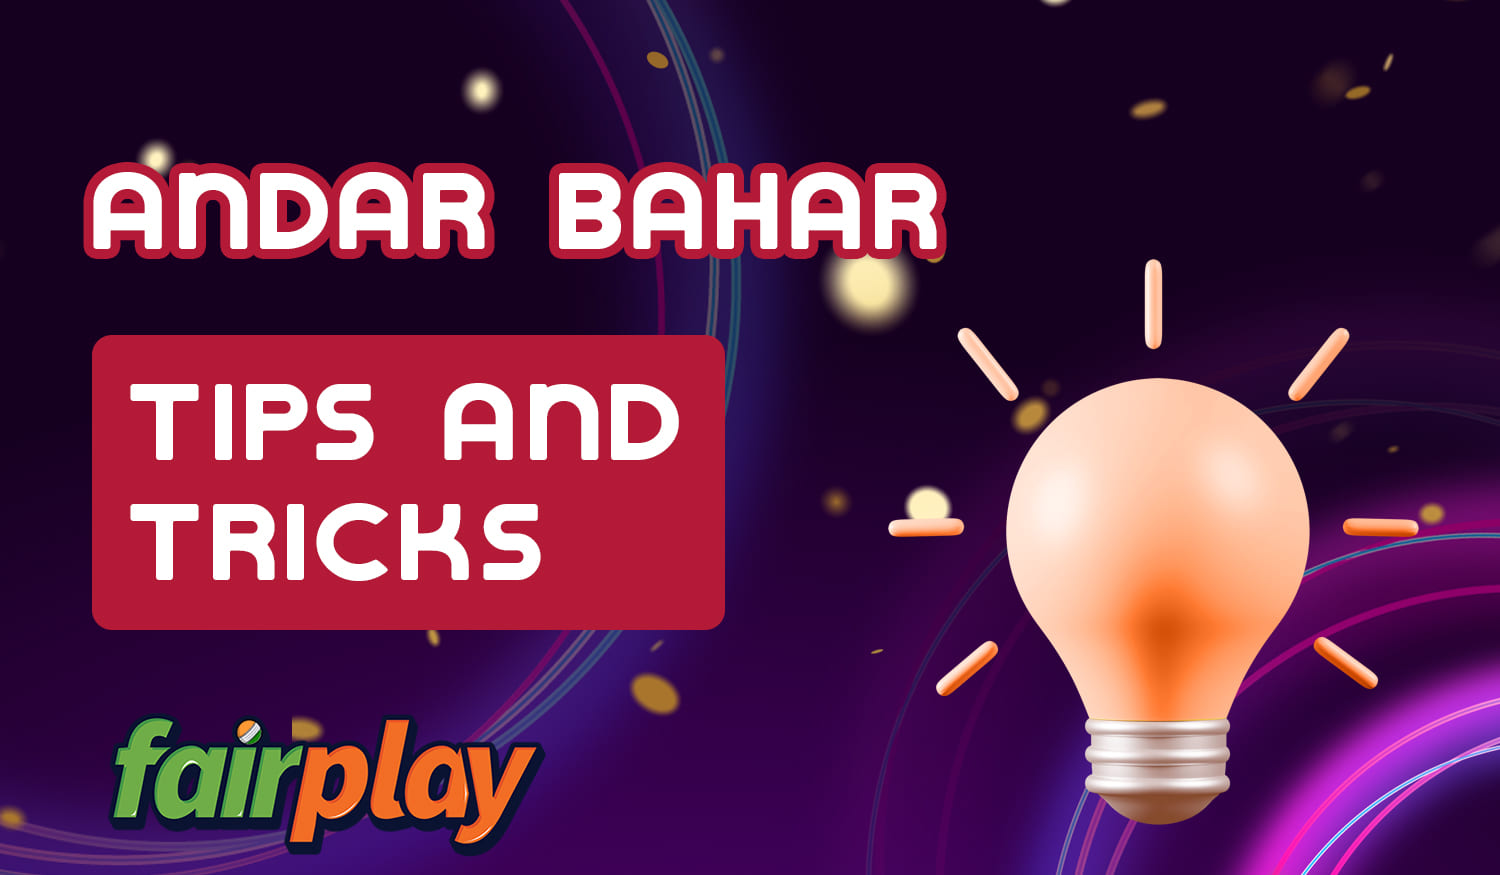 Tips and tricks to win Andar Bahar on Fairplay